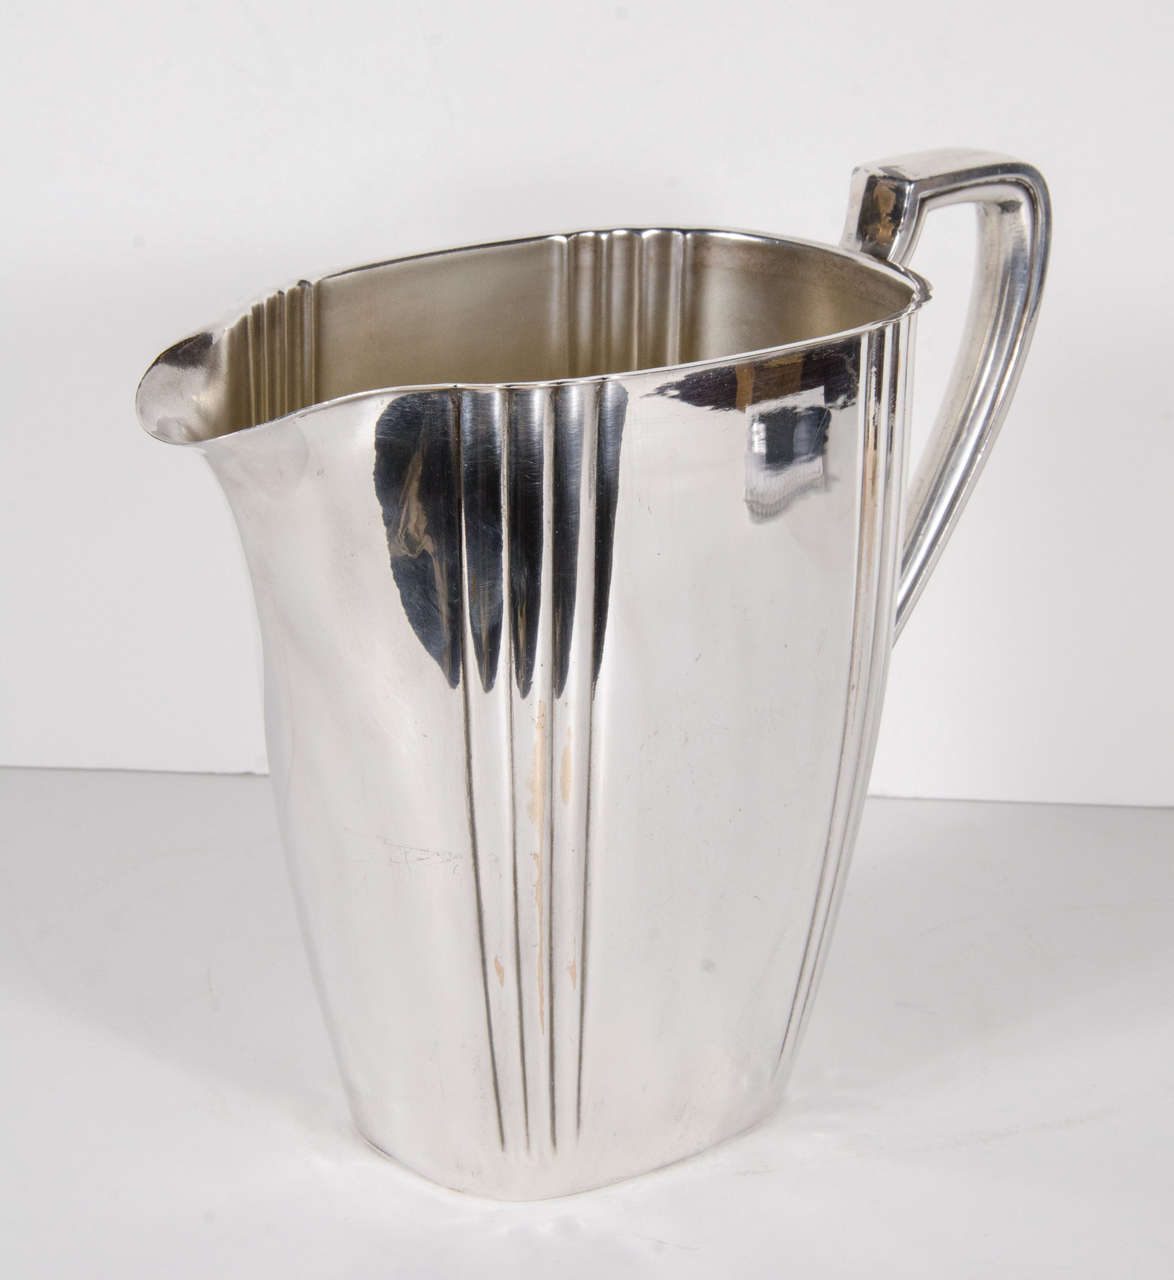 This stunning pitcher features a Art Deco style ribbed detailing with a stylized neoclassic handle.This pitcher is made of fine silver-plate and bears the name Rogers Company on the bottom.